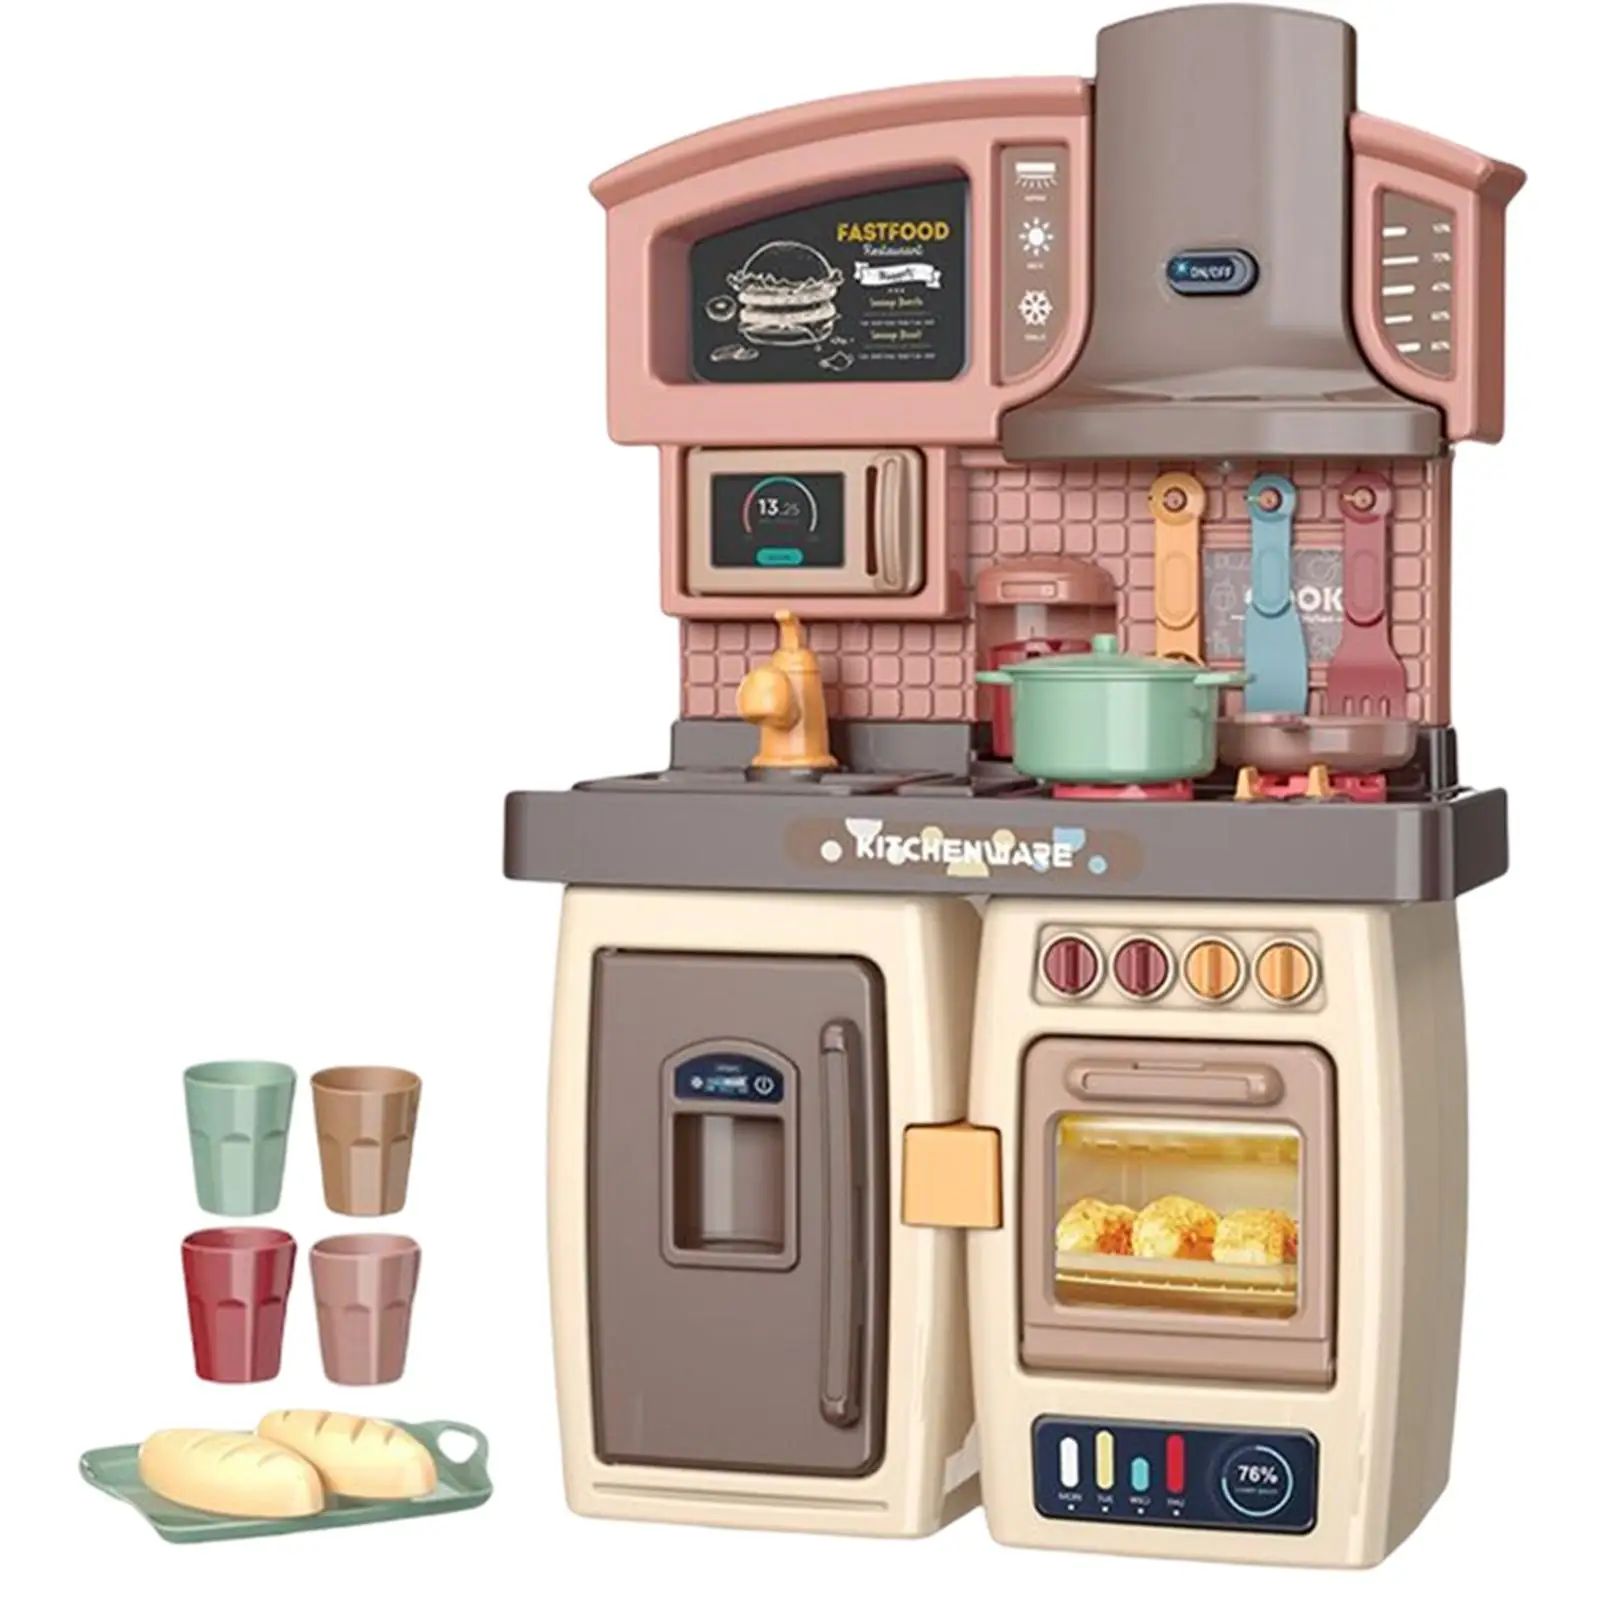 Kids Kitchen Playset Simulation Toys Educational Toys Gifts Play Food Toys Cooking Sink Play Kitchen Set for Birthday Christmas